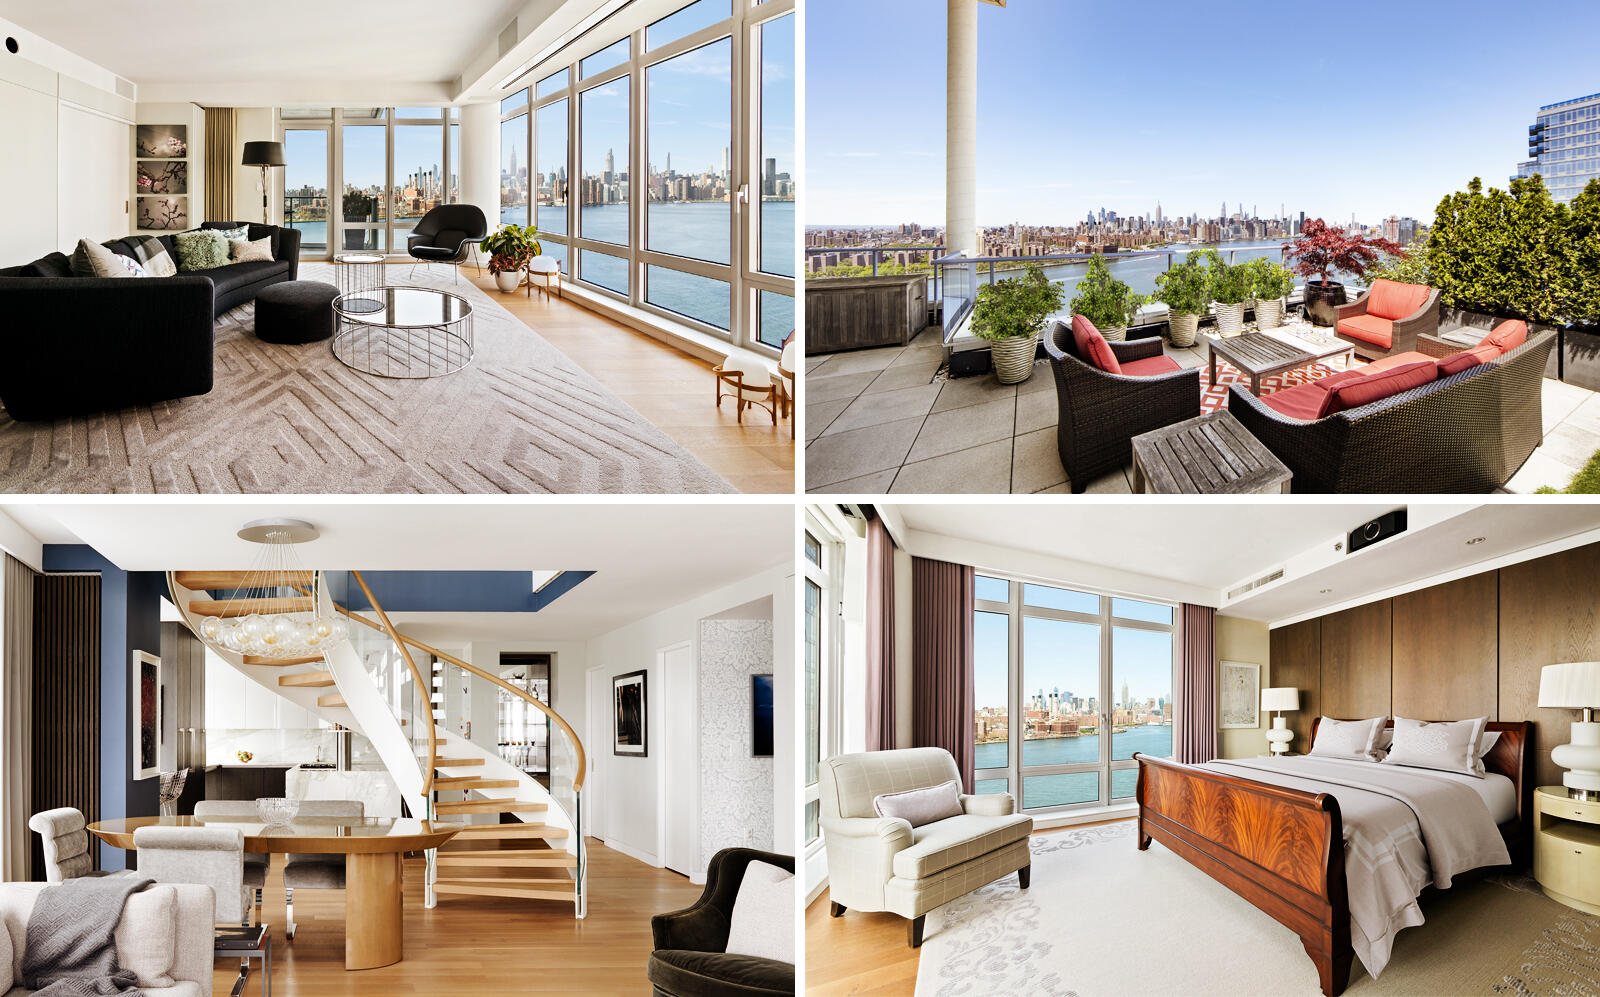 The $8.31 million Northside Piers unit (Photos by Allyson Lubow)